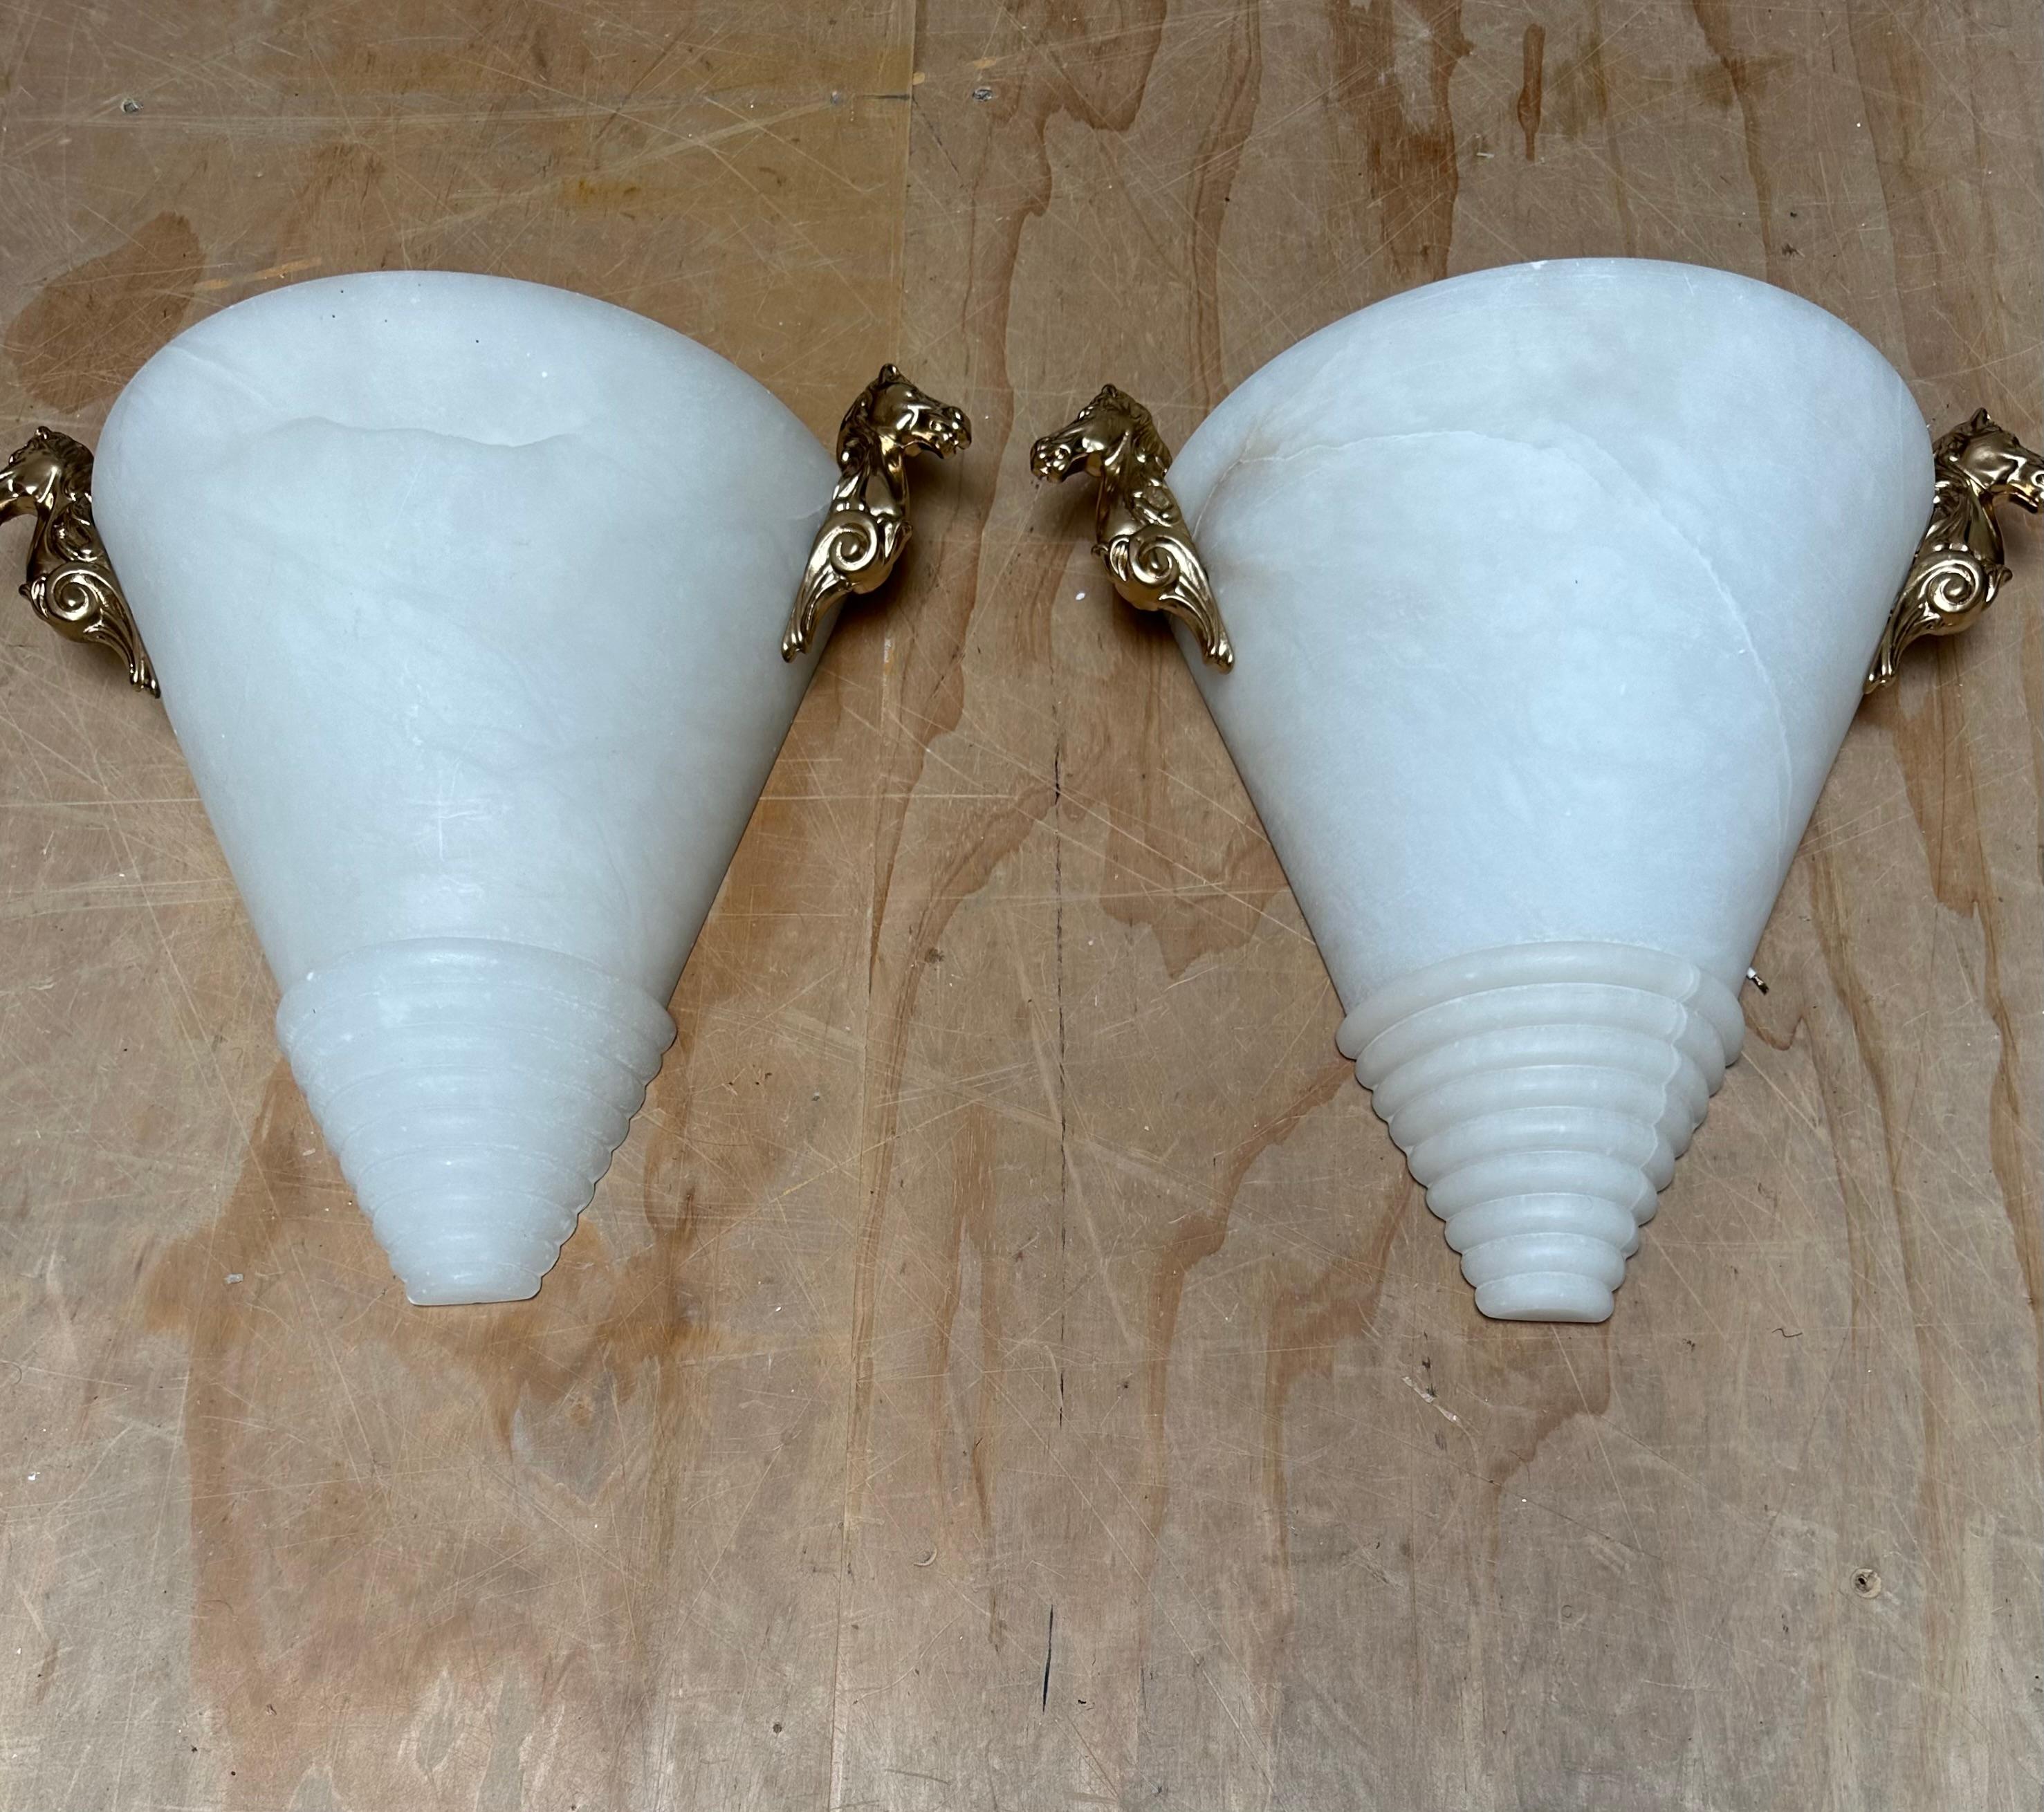 Midcentury Modern Italy Pair Art Deco Style Alabaster Sconces w Horse Sculptures For Sale 8